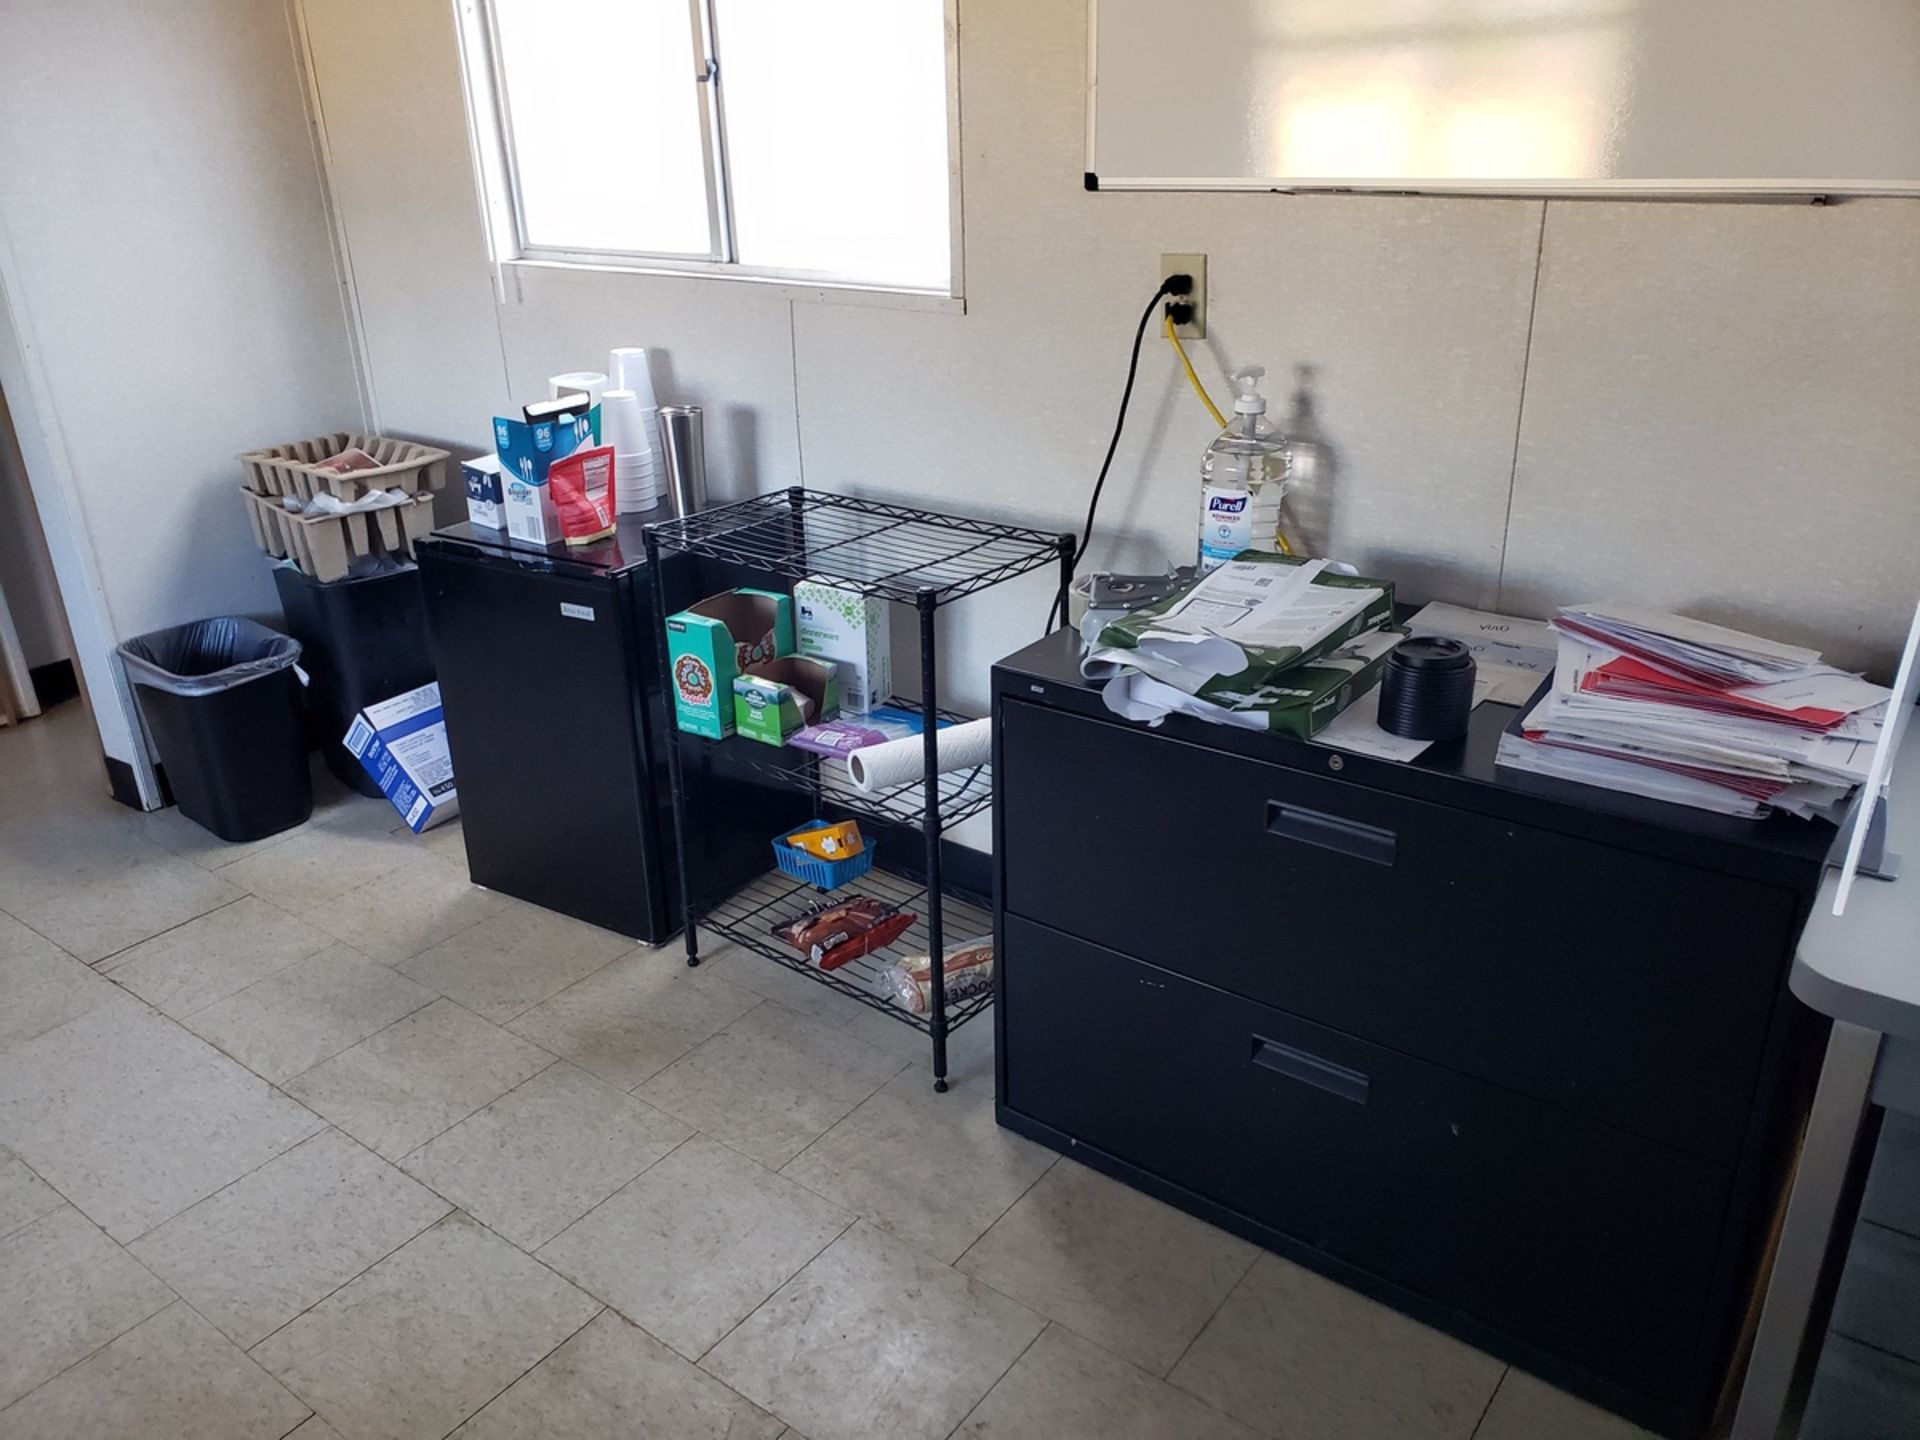 Contents of Outside Remote Office Trailer | Rig Fee: $250 - Image 2 of 7